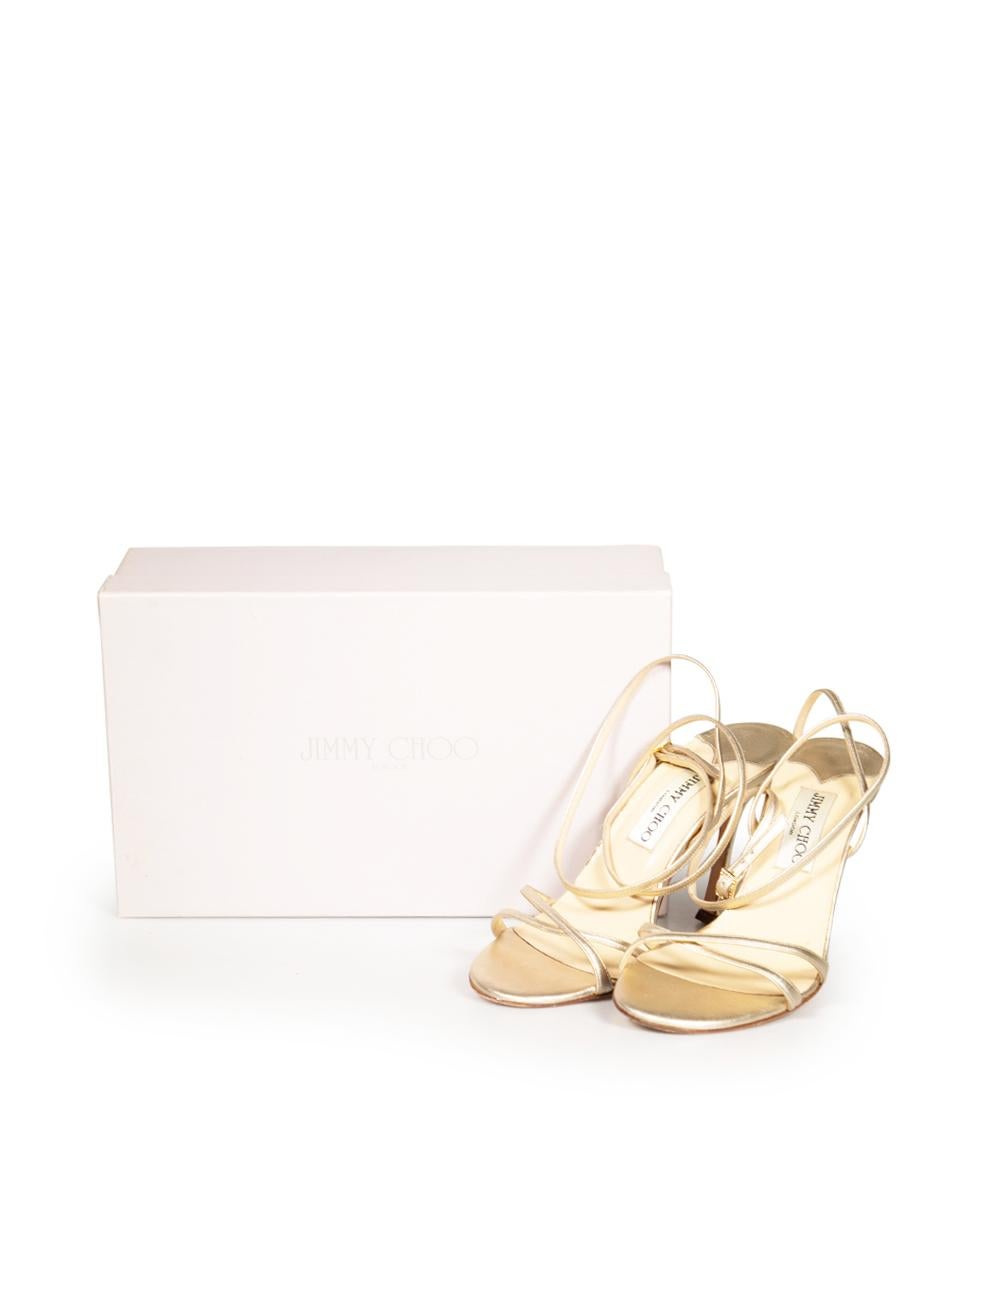 Jimmy Choo Gold Leather Strappy Sandals Size IT 38 4